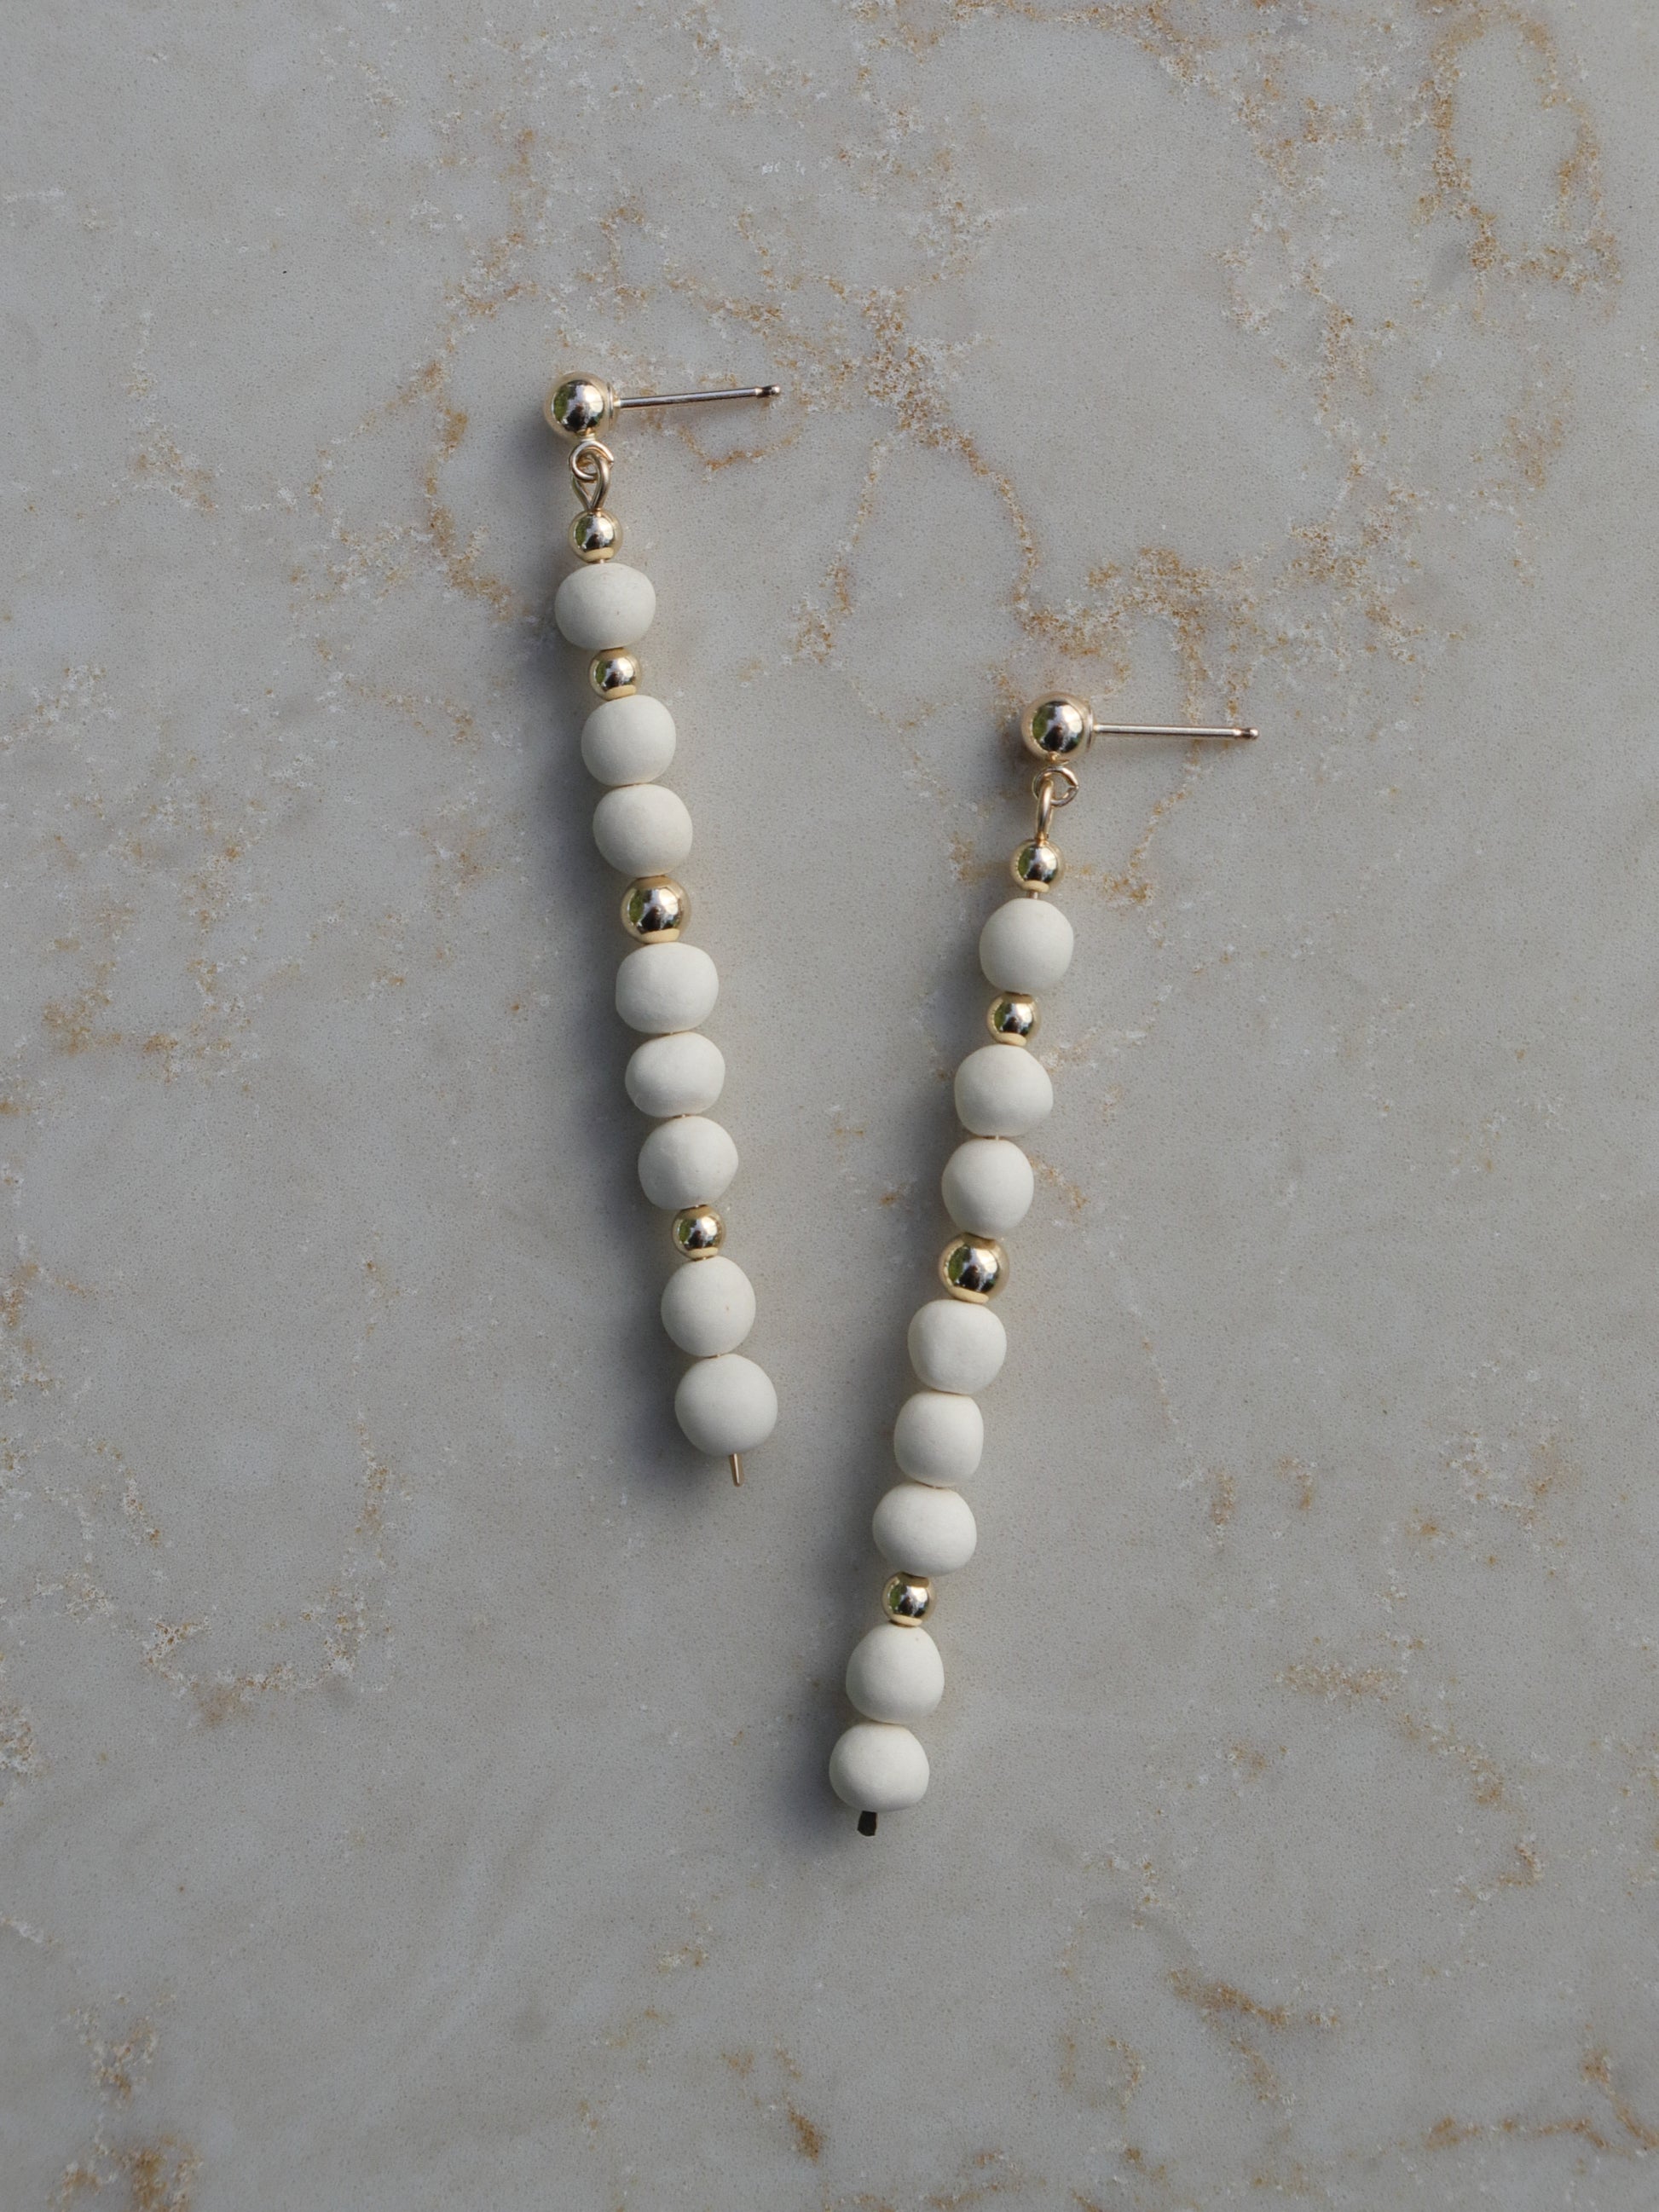 Long, dangle earrings made with stacked white porcelain and gold beads hanging on ball posts.